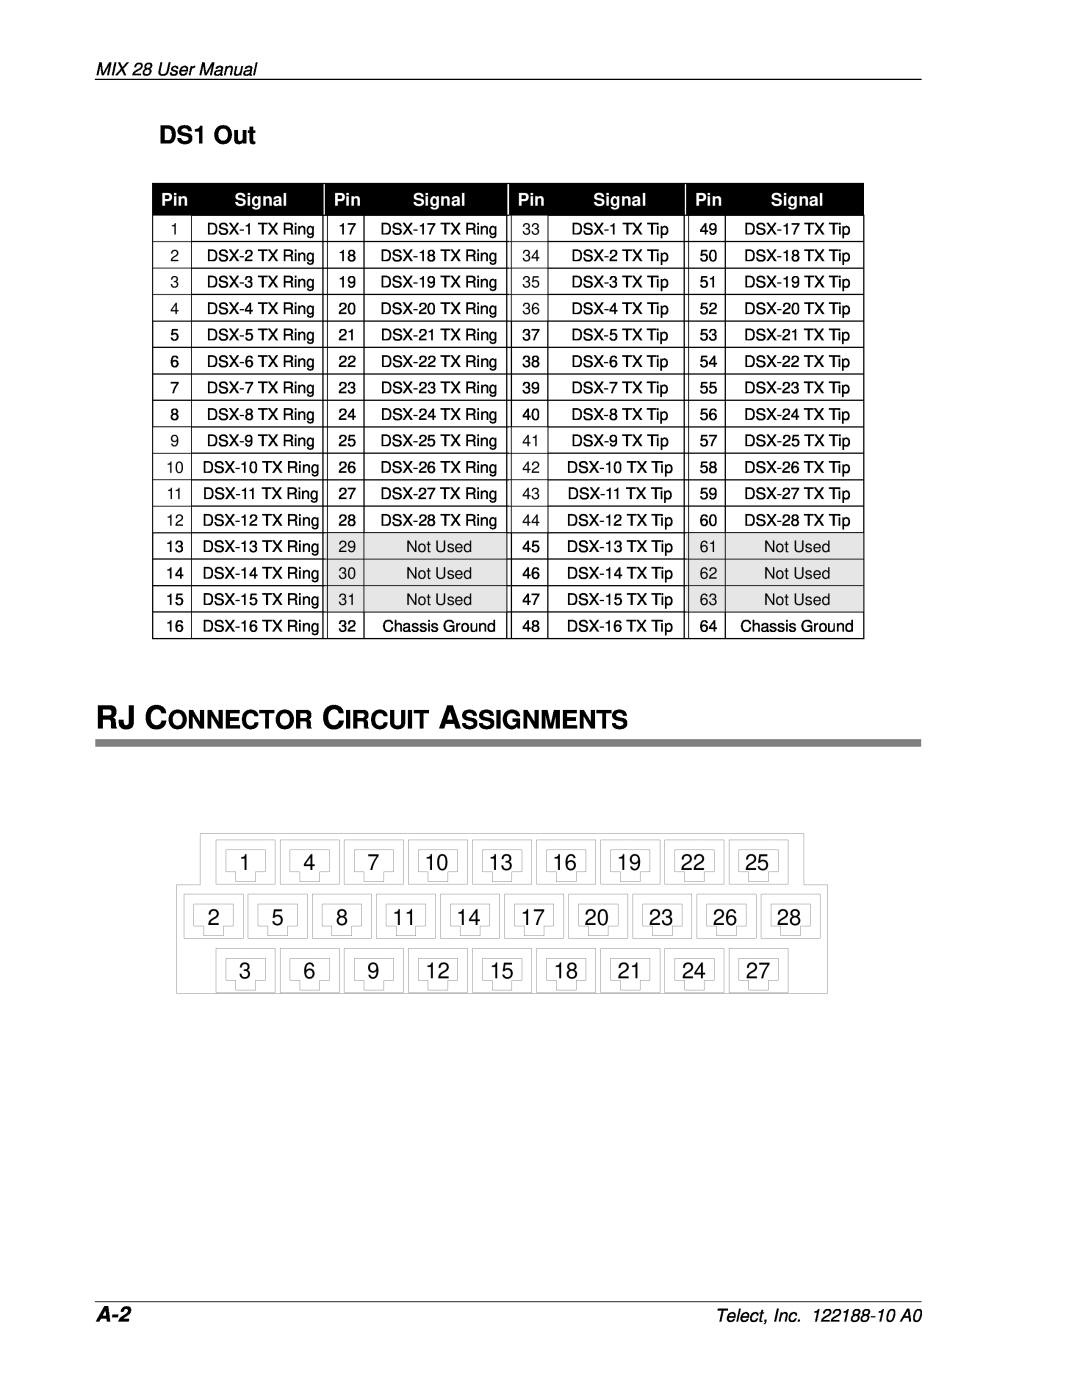 Telect MIX 56 user manual DS1 Out, Rj Connector Circuit Assignments, MIX 28 User Manual, Signal, Telect, Inc. 122188-10 A0 